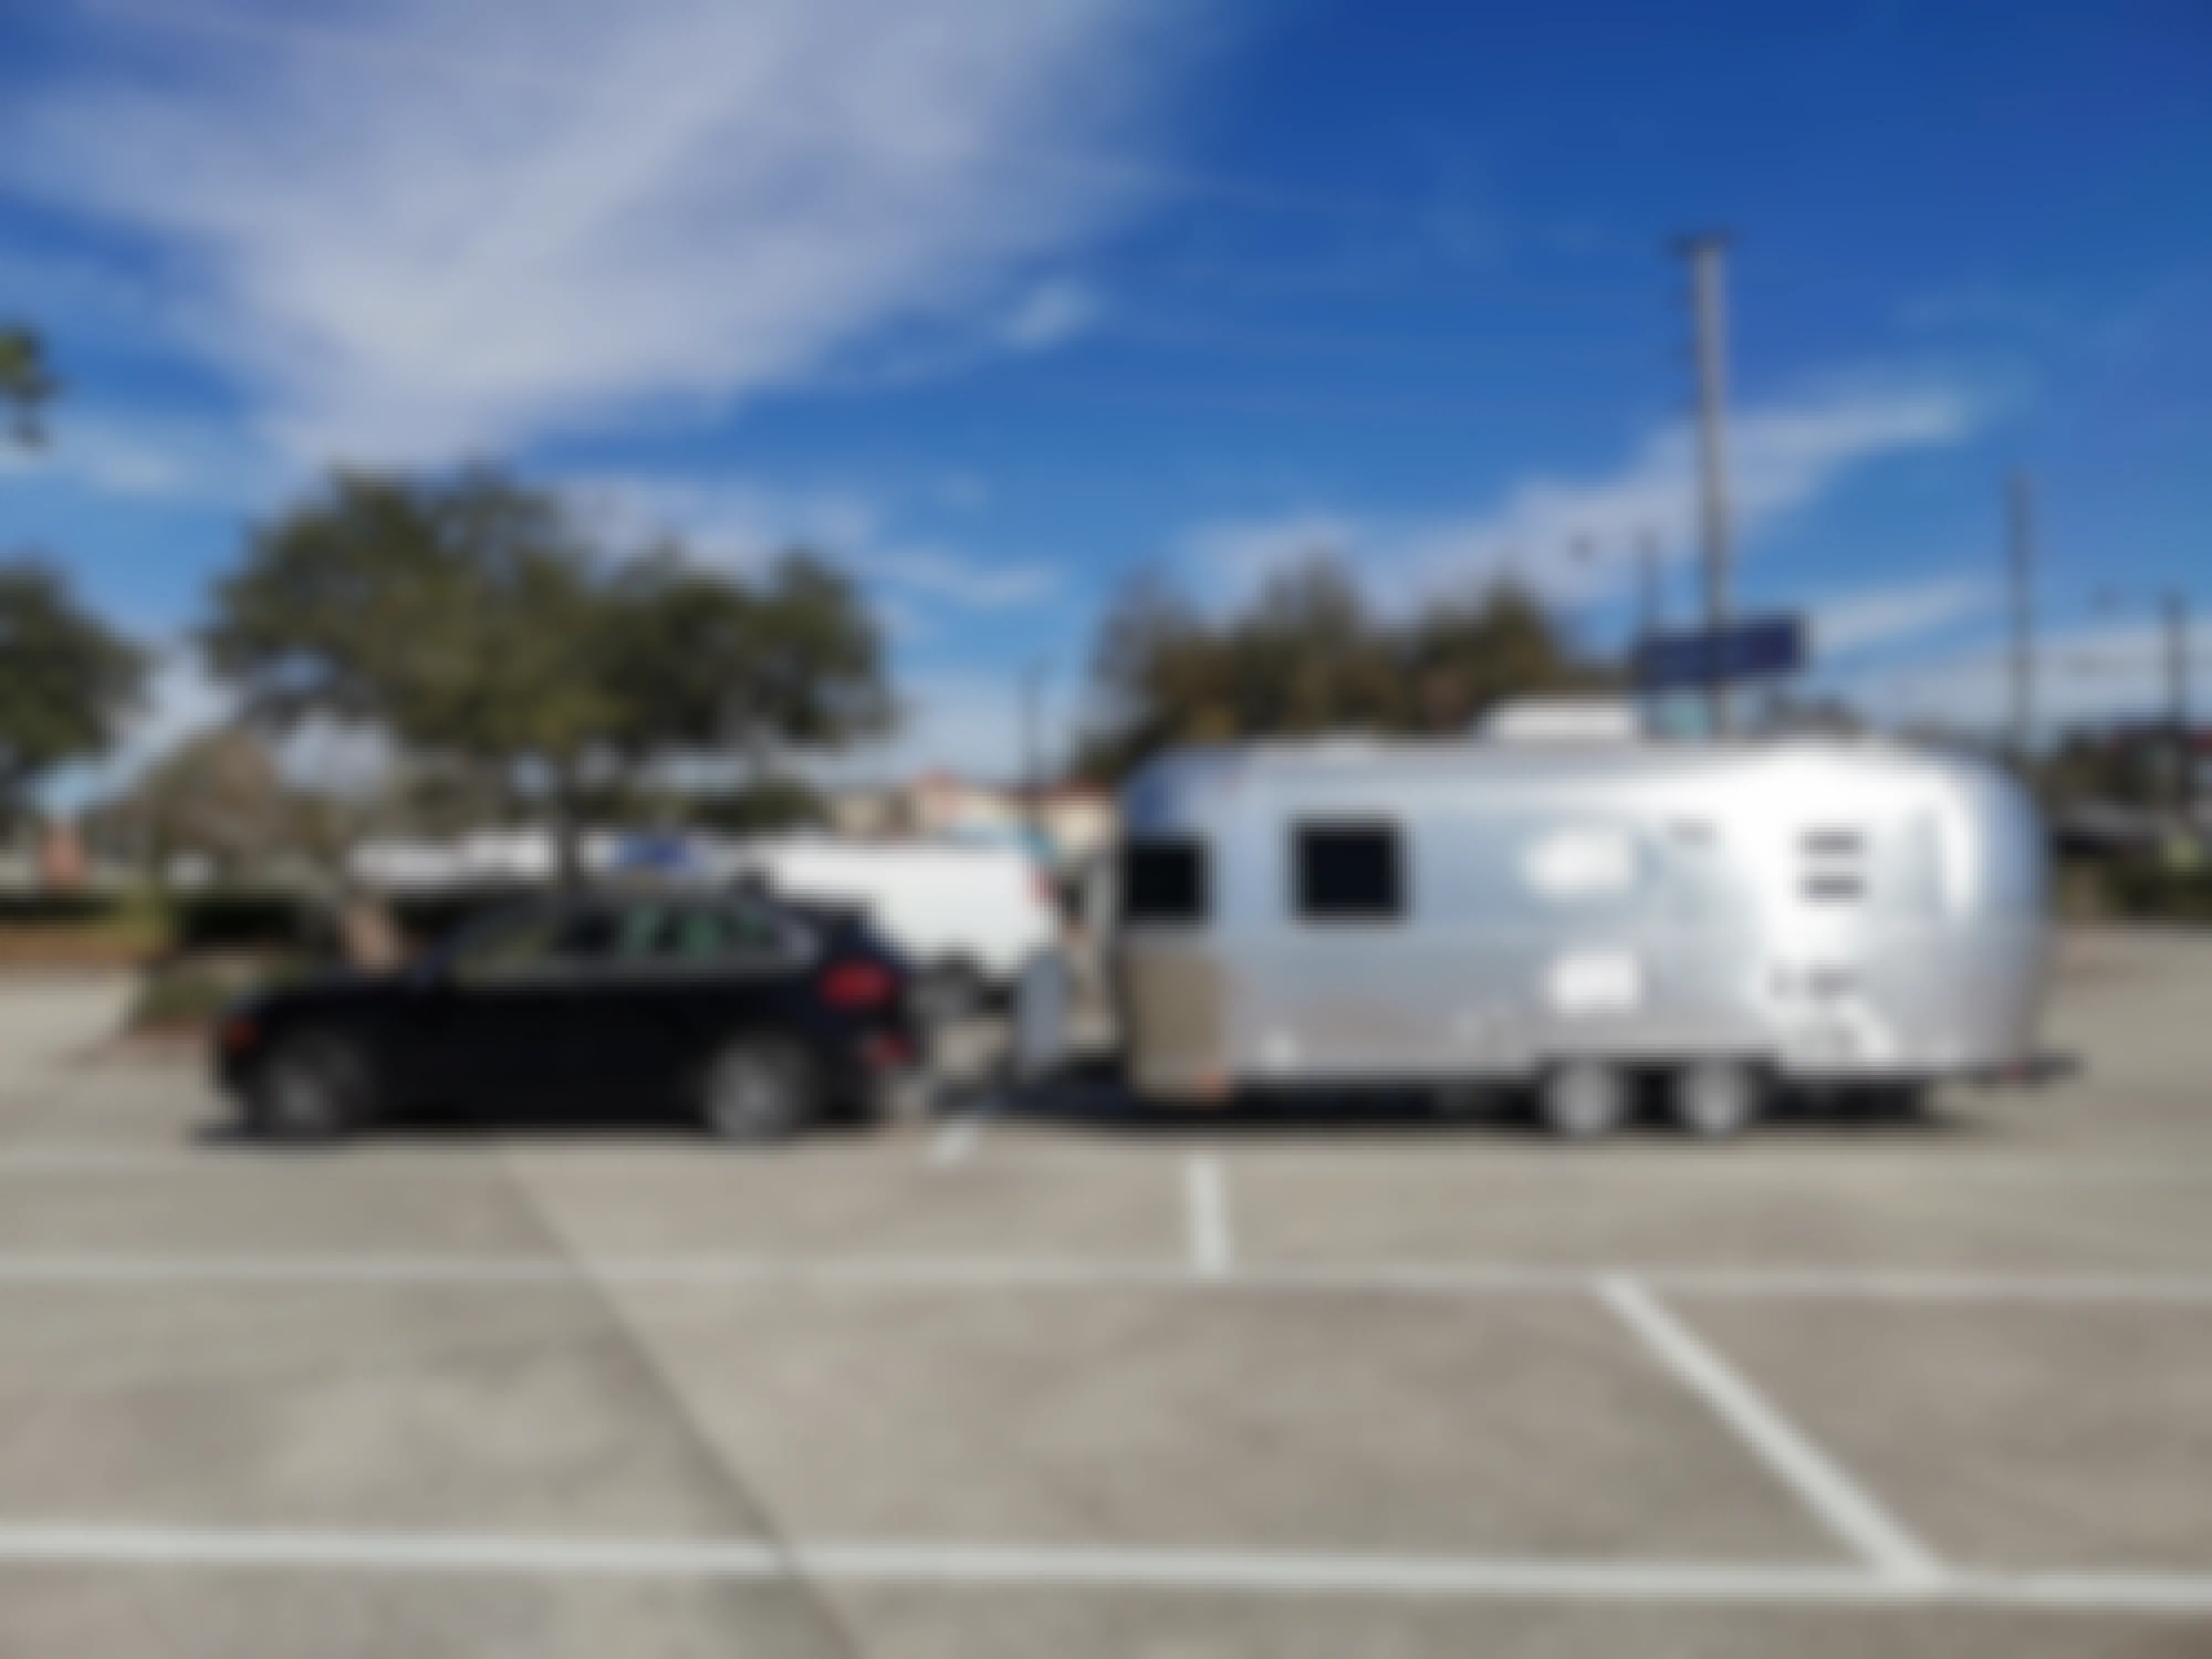 A truck towing an airstream RV parked in a Walmart parking lot